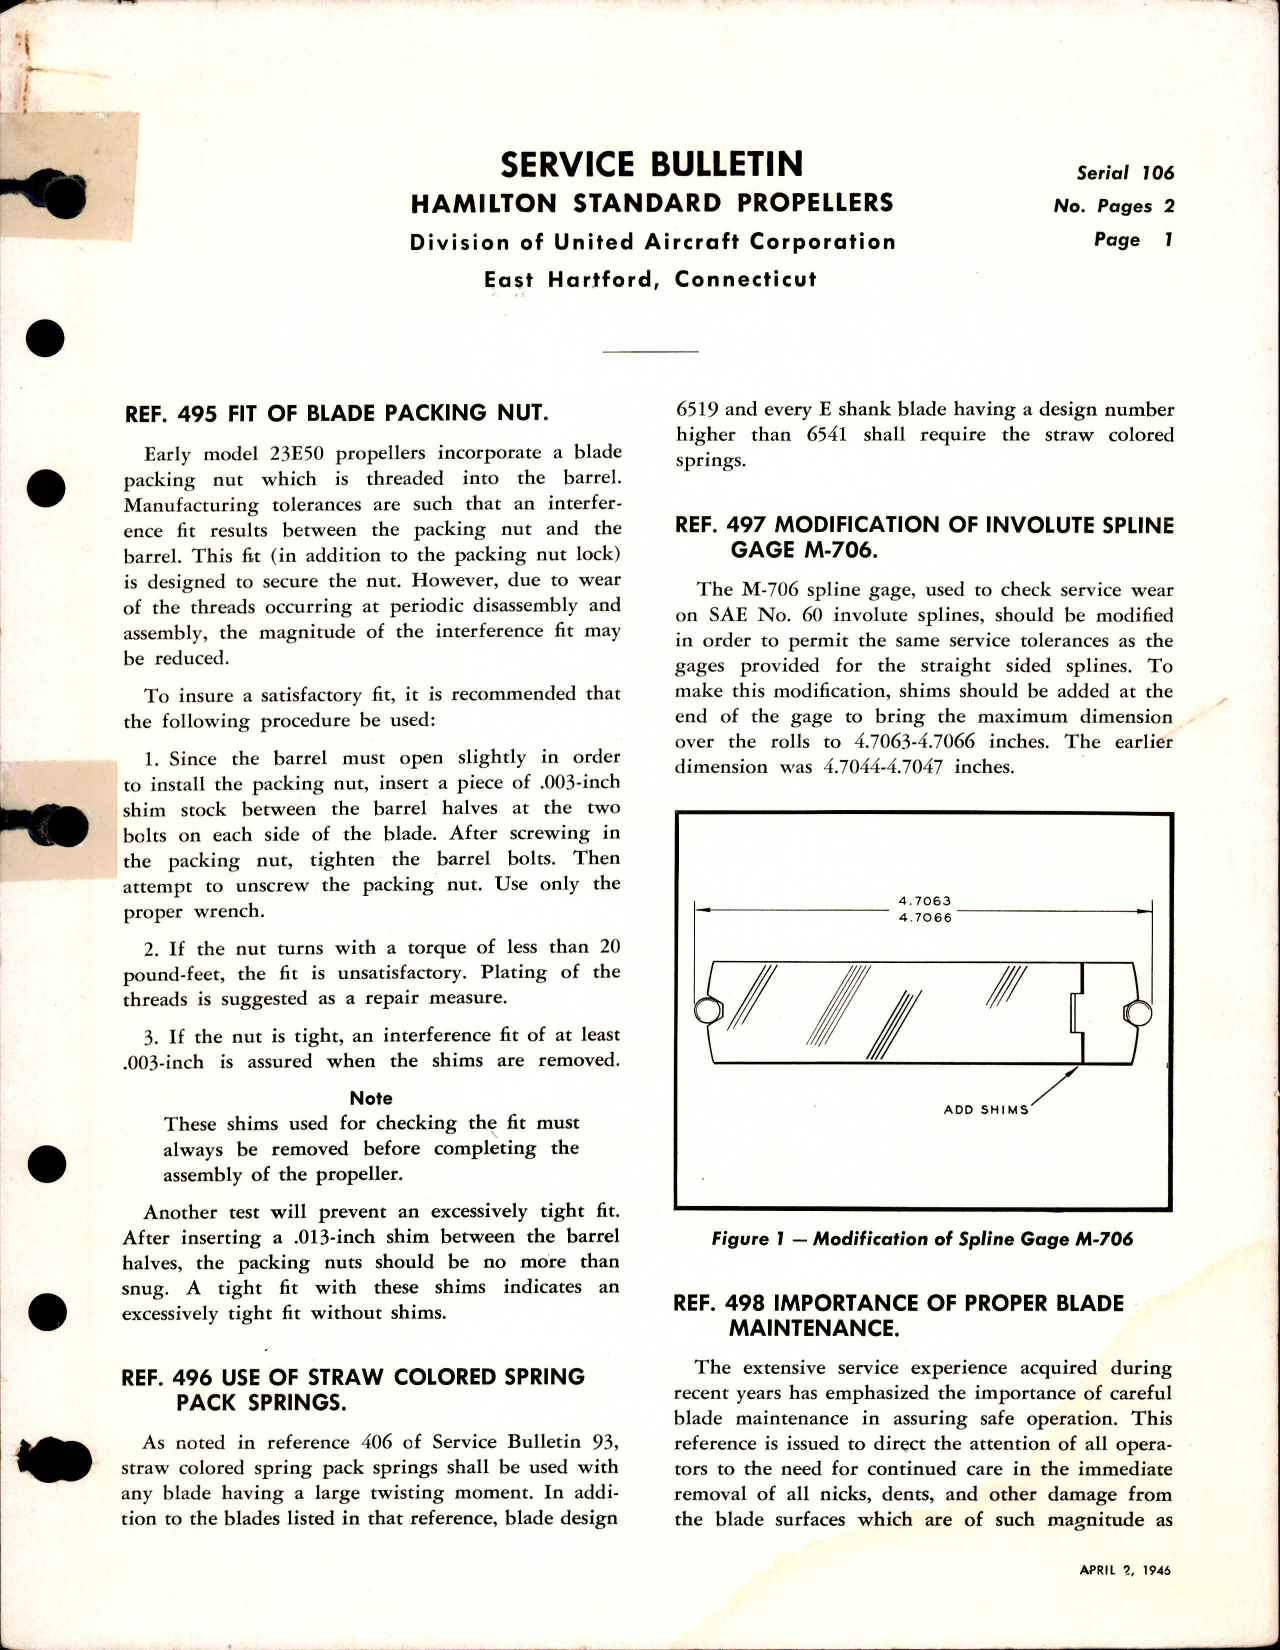 Sample page 1 from AirCorps Library document: Fit of Blade Packing Nut, Ref 495